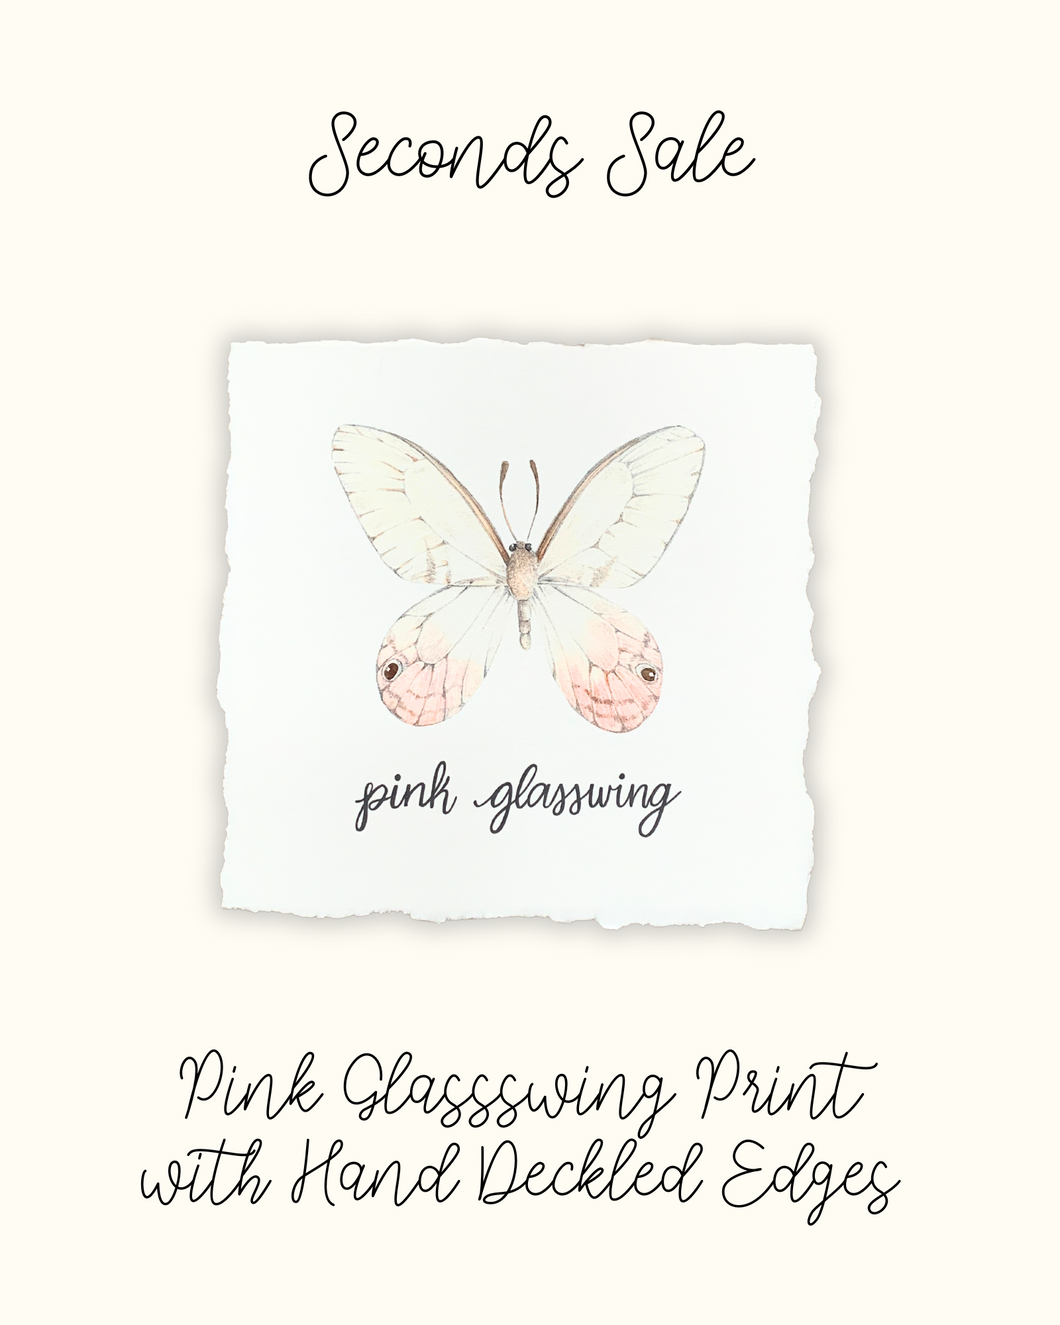 Pink Glasswing Print with Hand Deckled Edge - Seconds Sale